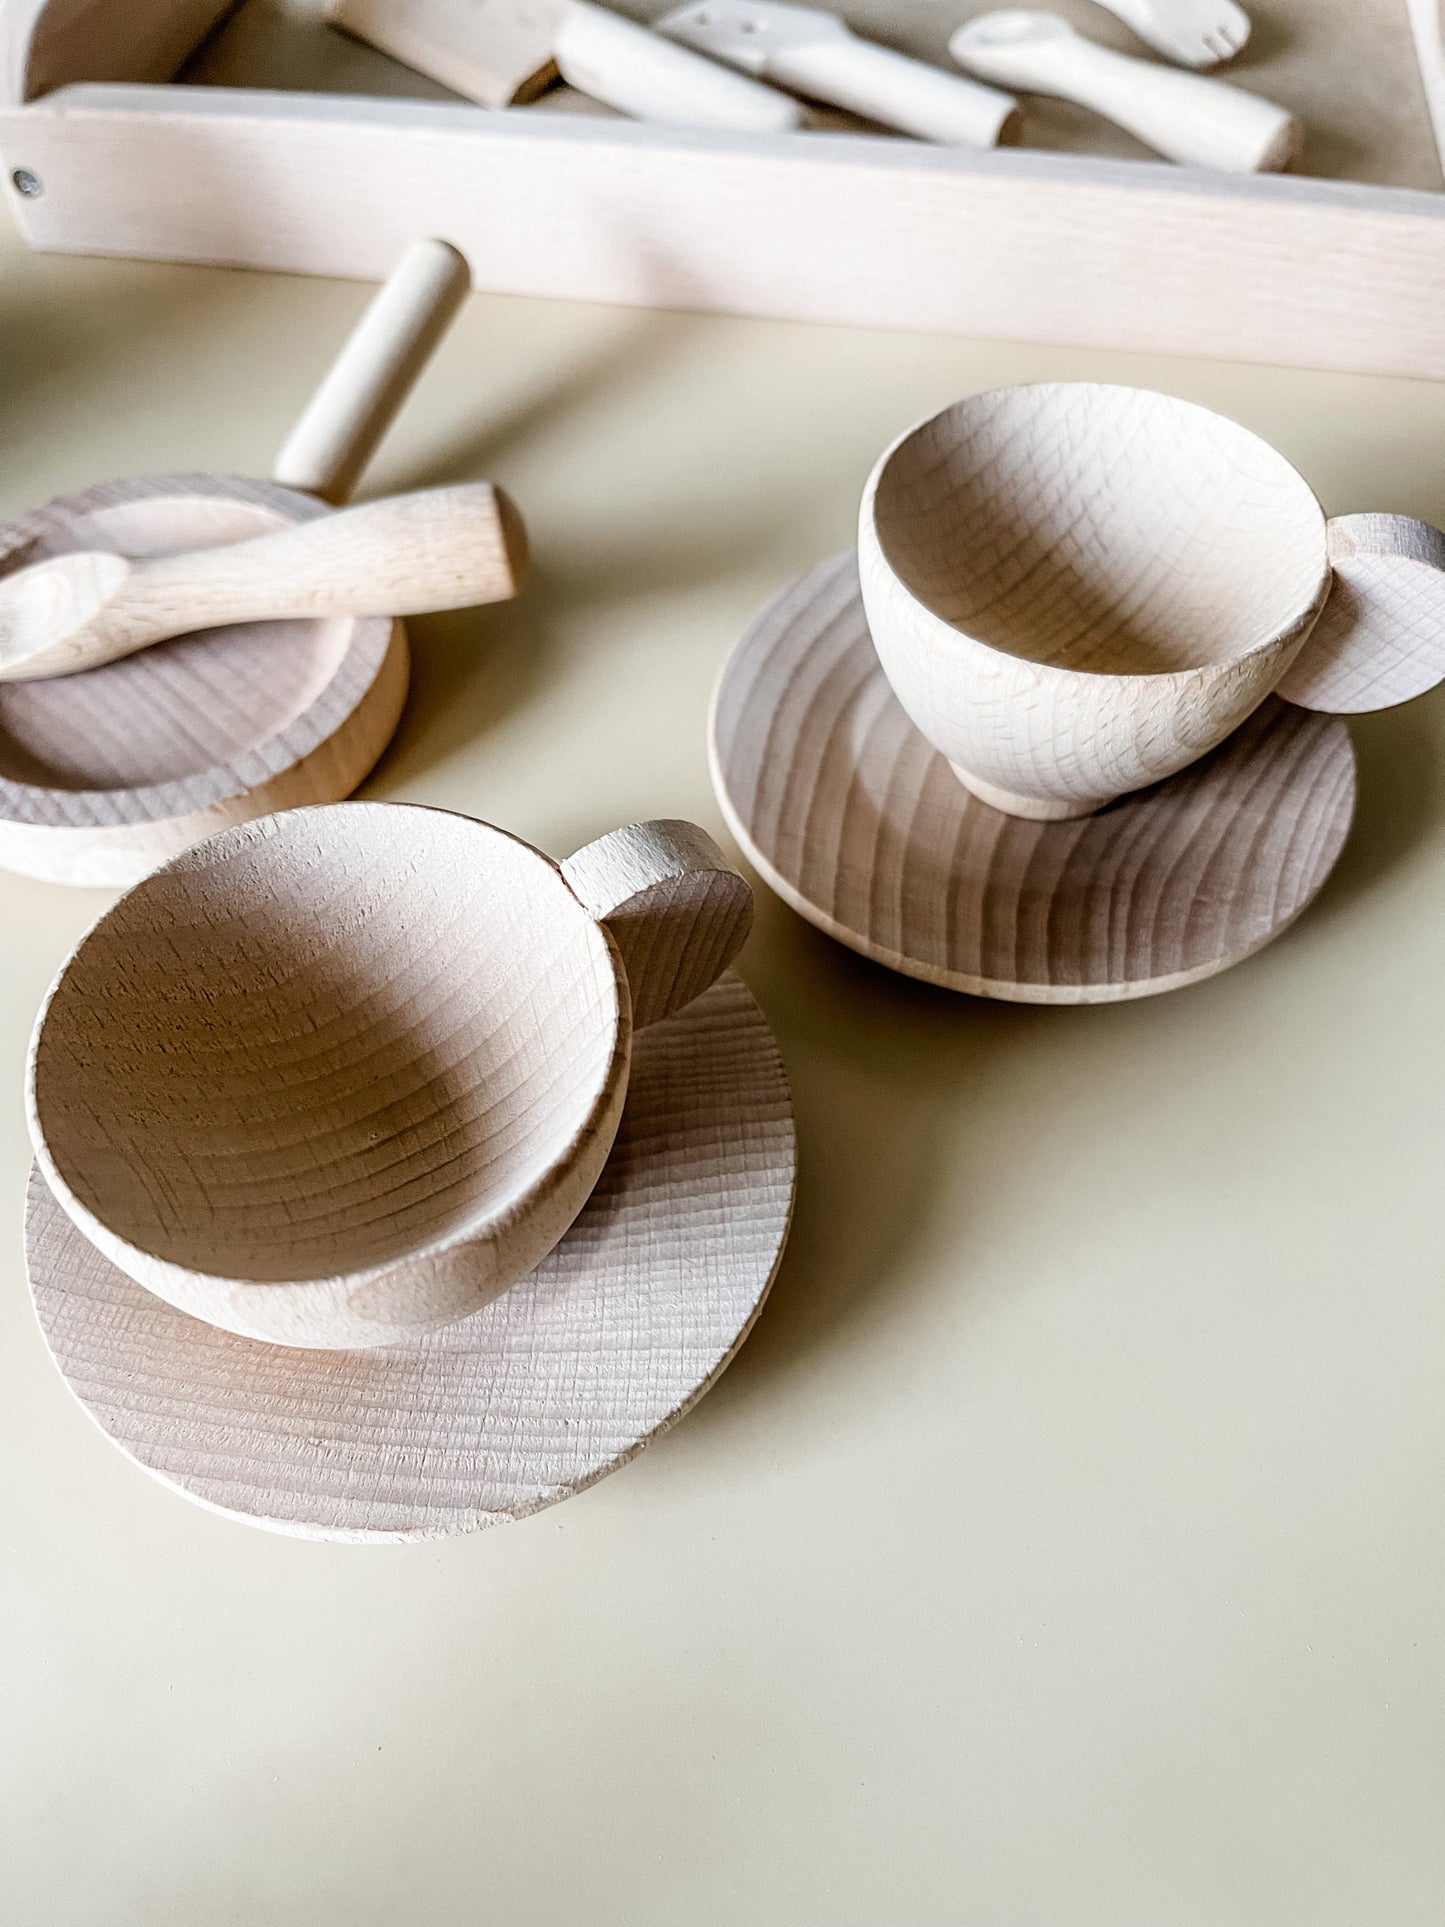 Wooden toy coffee mugs on small plates